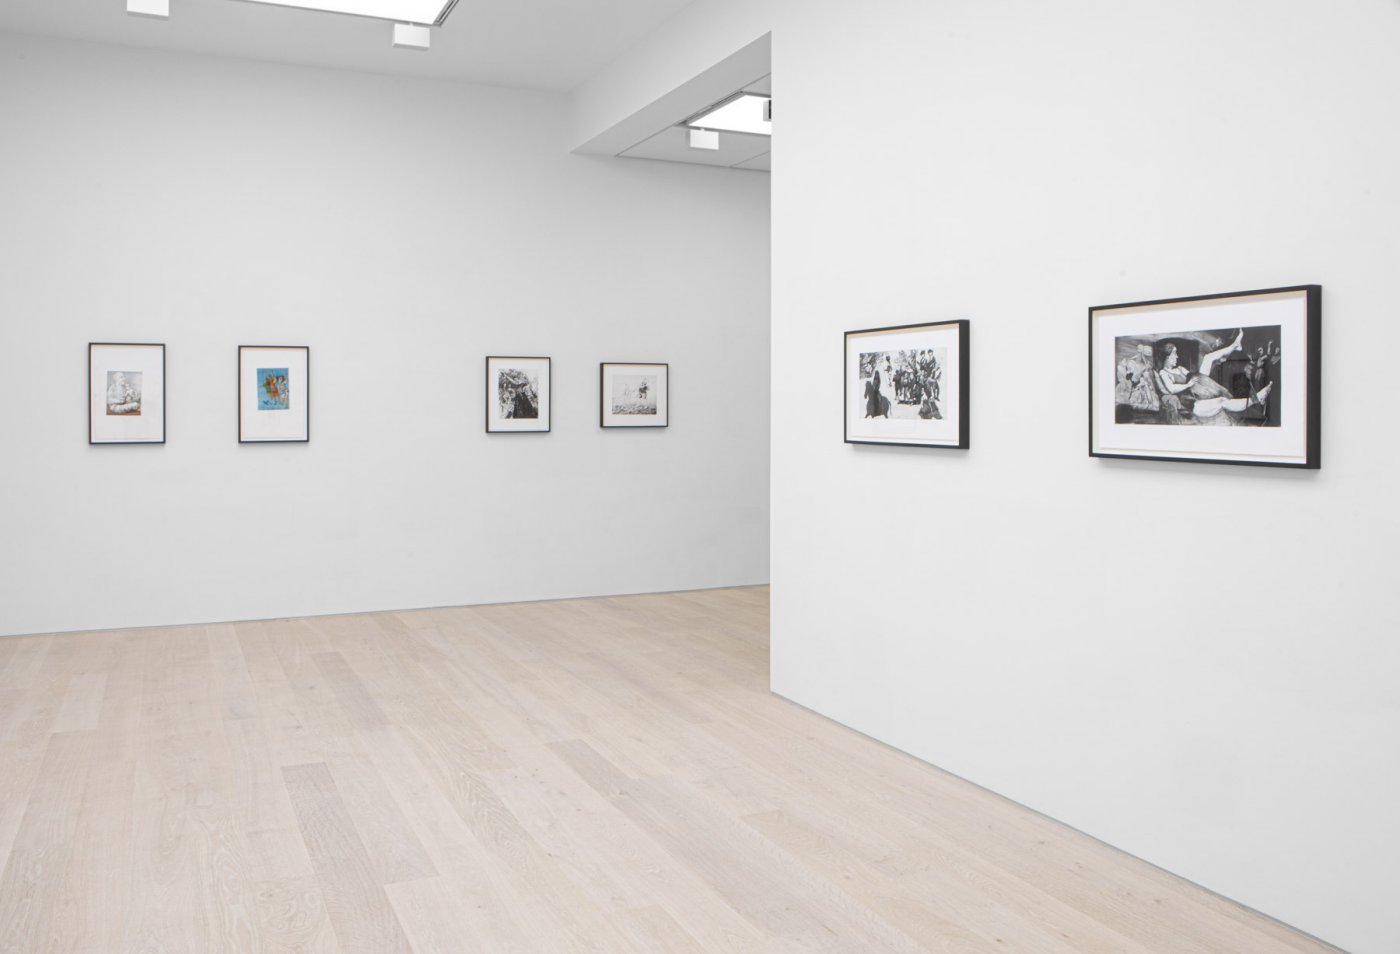 Installation image for Paula Rego: An Enduring Journey, at Cristea Roberts Gallery